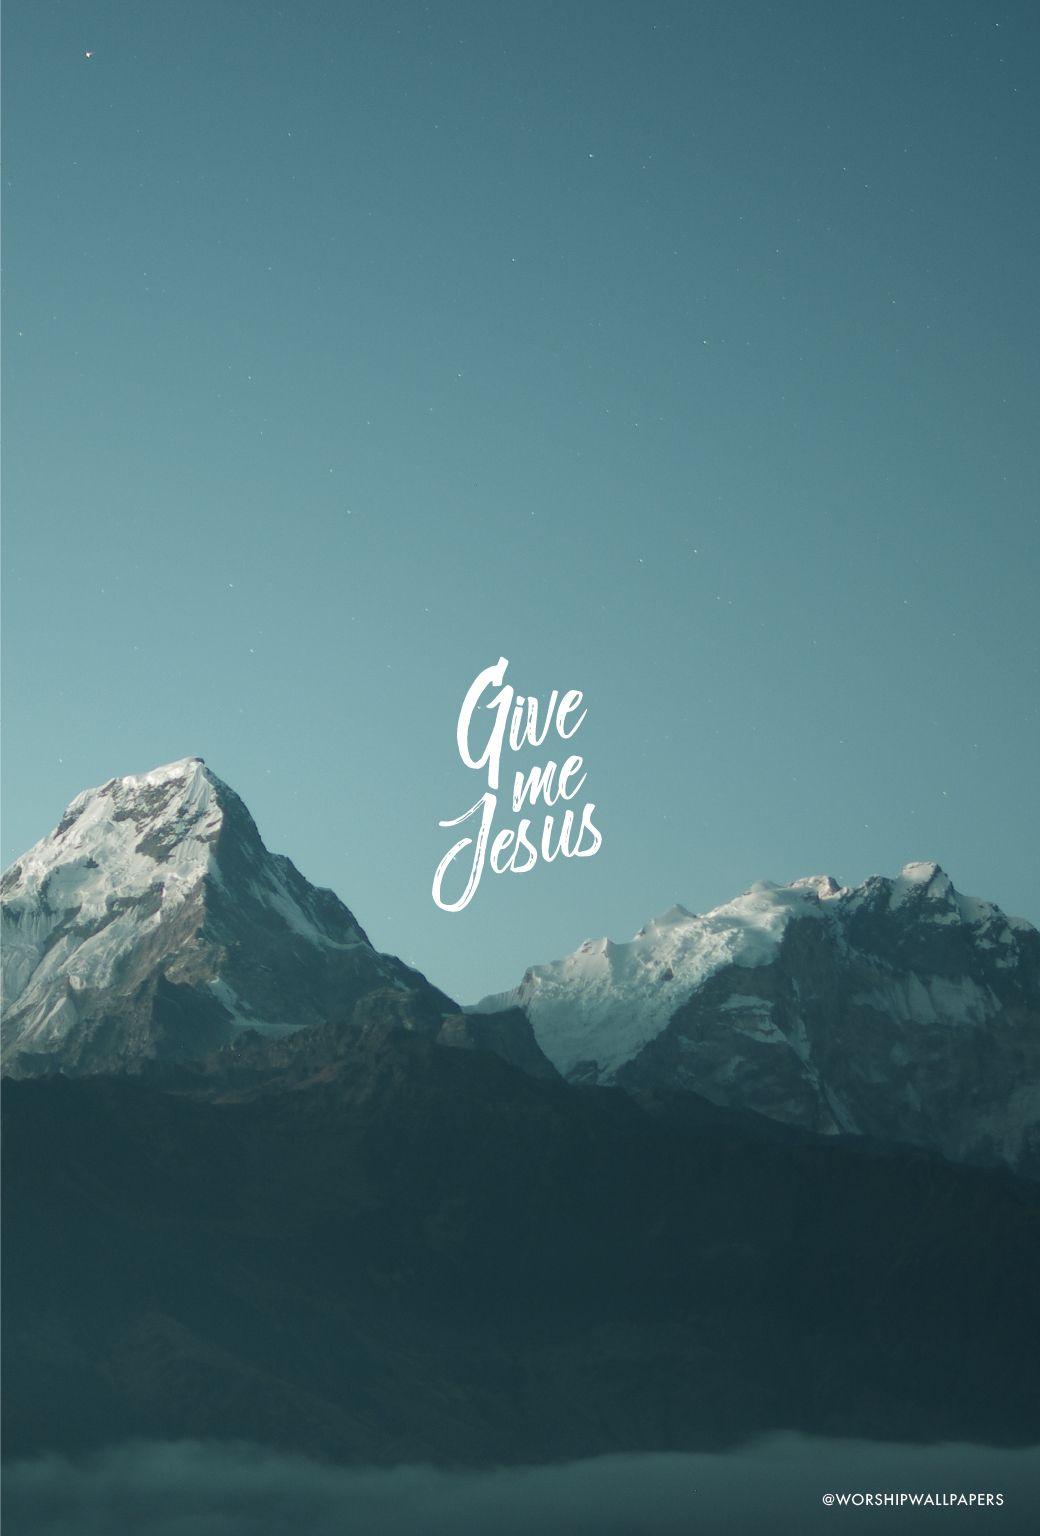 Give me Jesus phone wallpaper by @worshipwallpapers - Christian iPhone